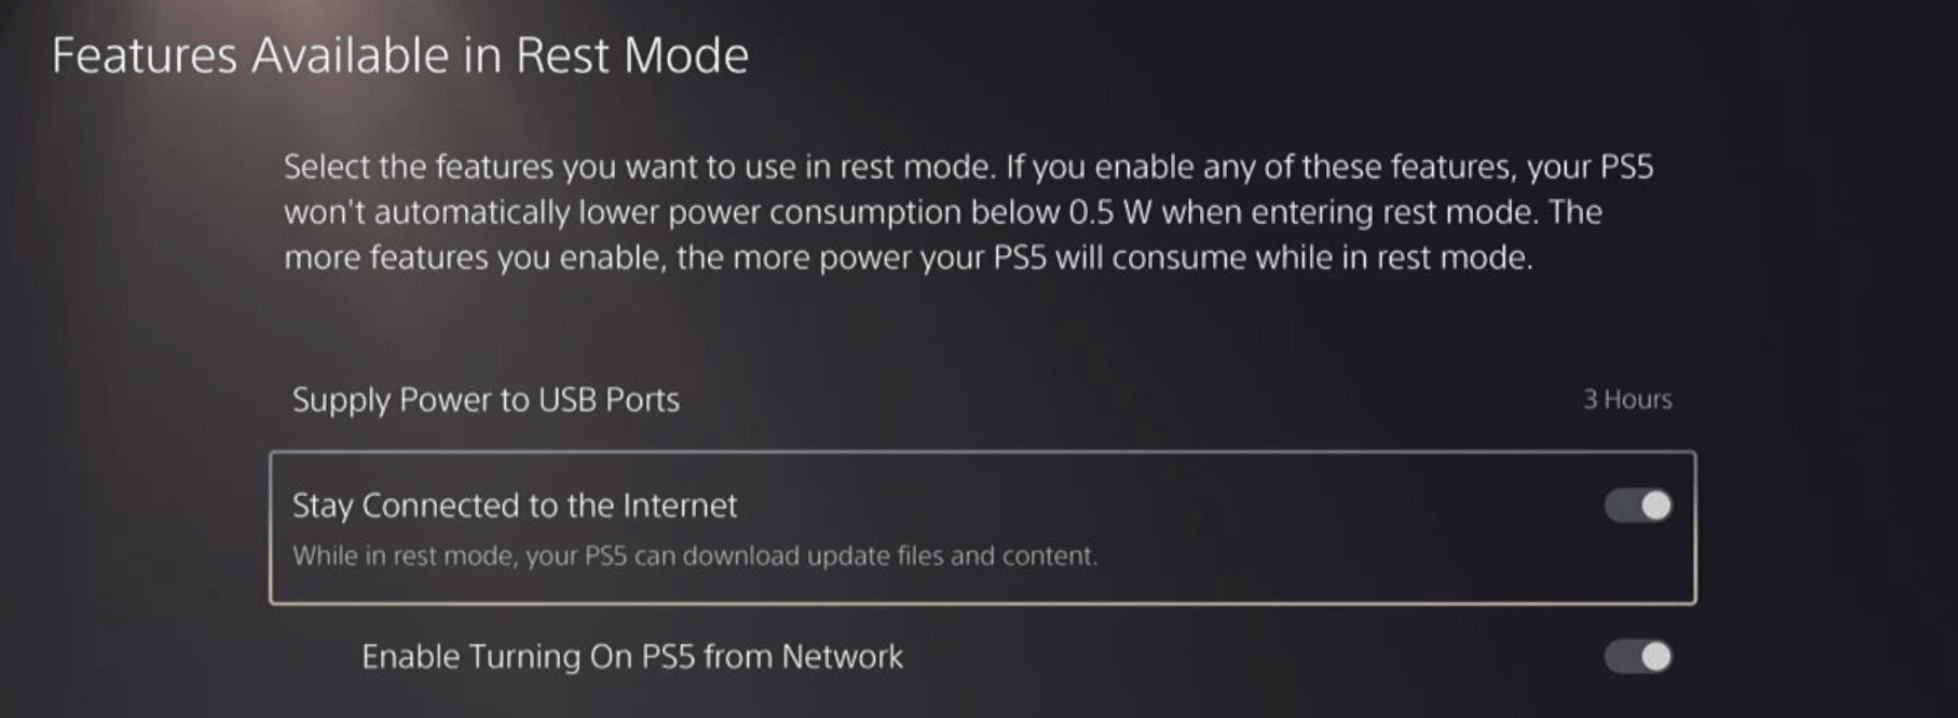 Stay Connected to the Internet is toggled in PS5 rest mode settings menu to enable automatic updates of Madden NFL 23